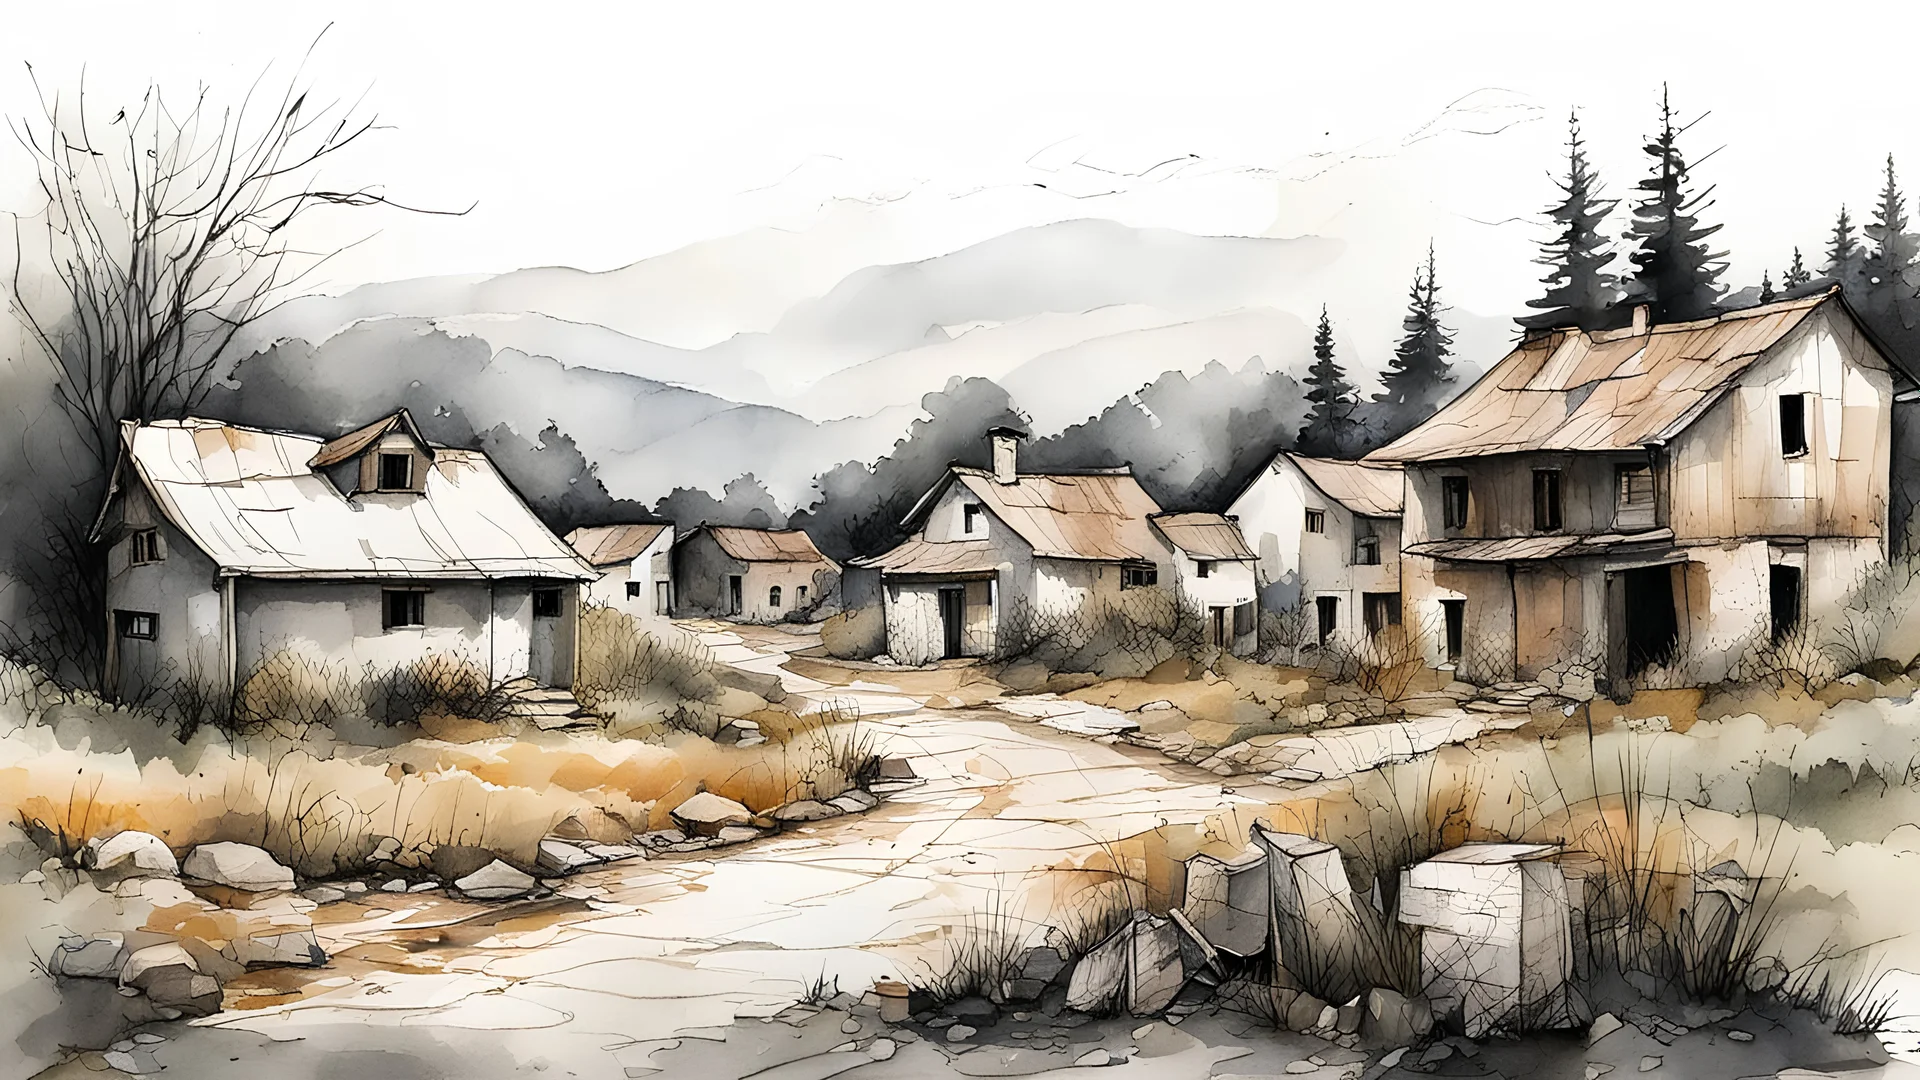 Street Sketch of an Abandoned Village Fineliner and Marker on Paper, in Ink and Watercolor Style, Ivory Color Palette, Oversized Canvases, Pixelated, Colorful Landscapes, Watercolor, High Resolution, Highly Detailed